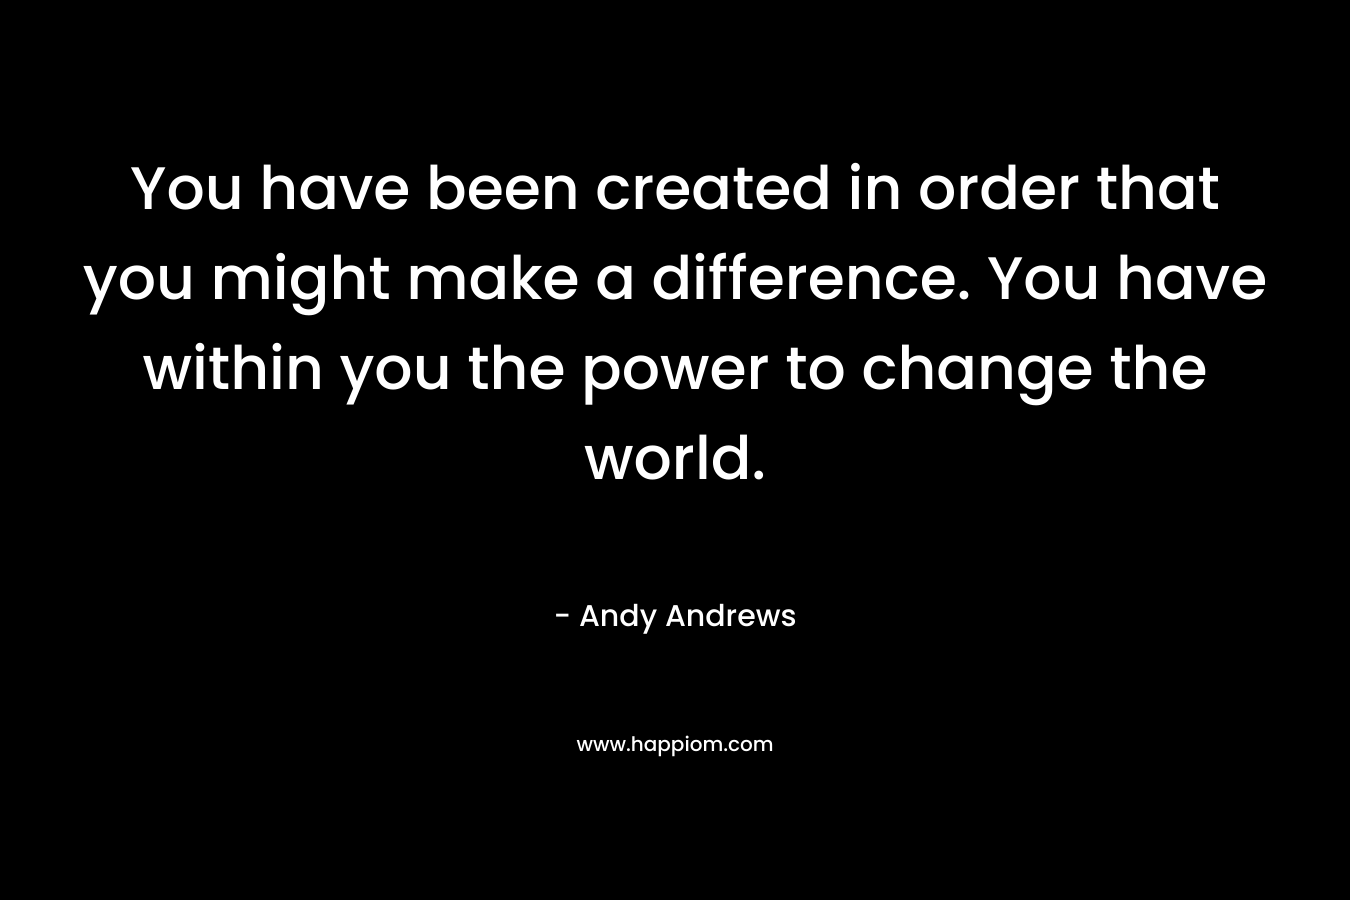 You have been created in order that you might make a difference. You have within you the power to change the world. – Andy Andrews